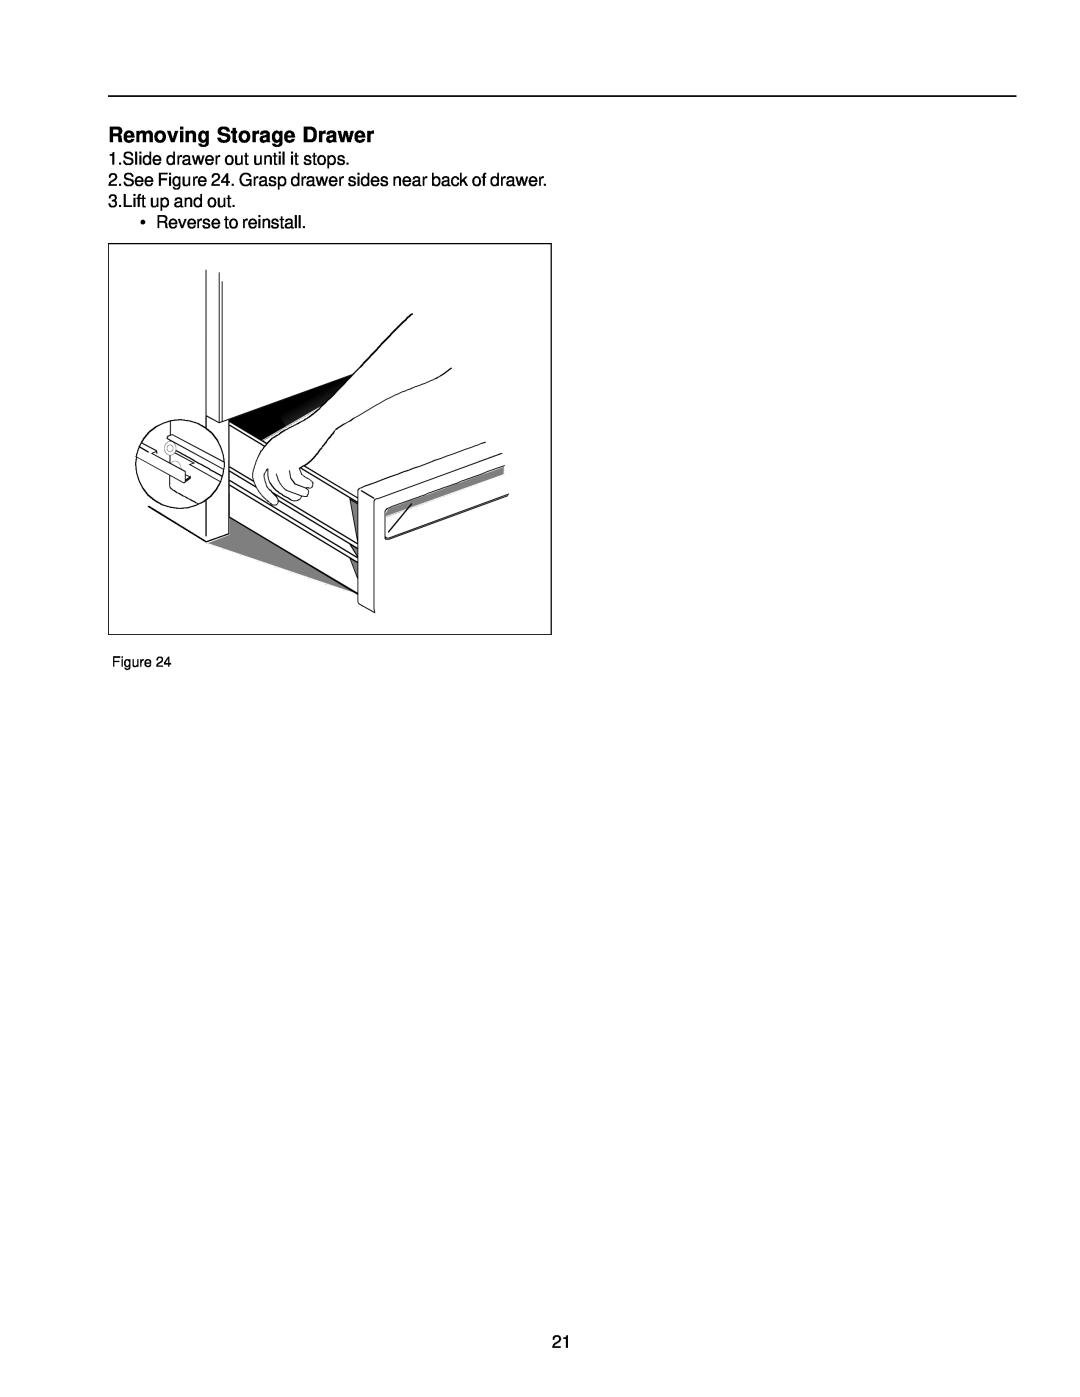 Amana ARR6400/ART6511 owner manual Removing Storage Drawer, Slide drawer out until it stops, Reverse to reinstall 